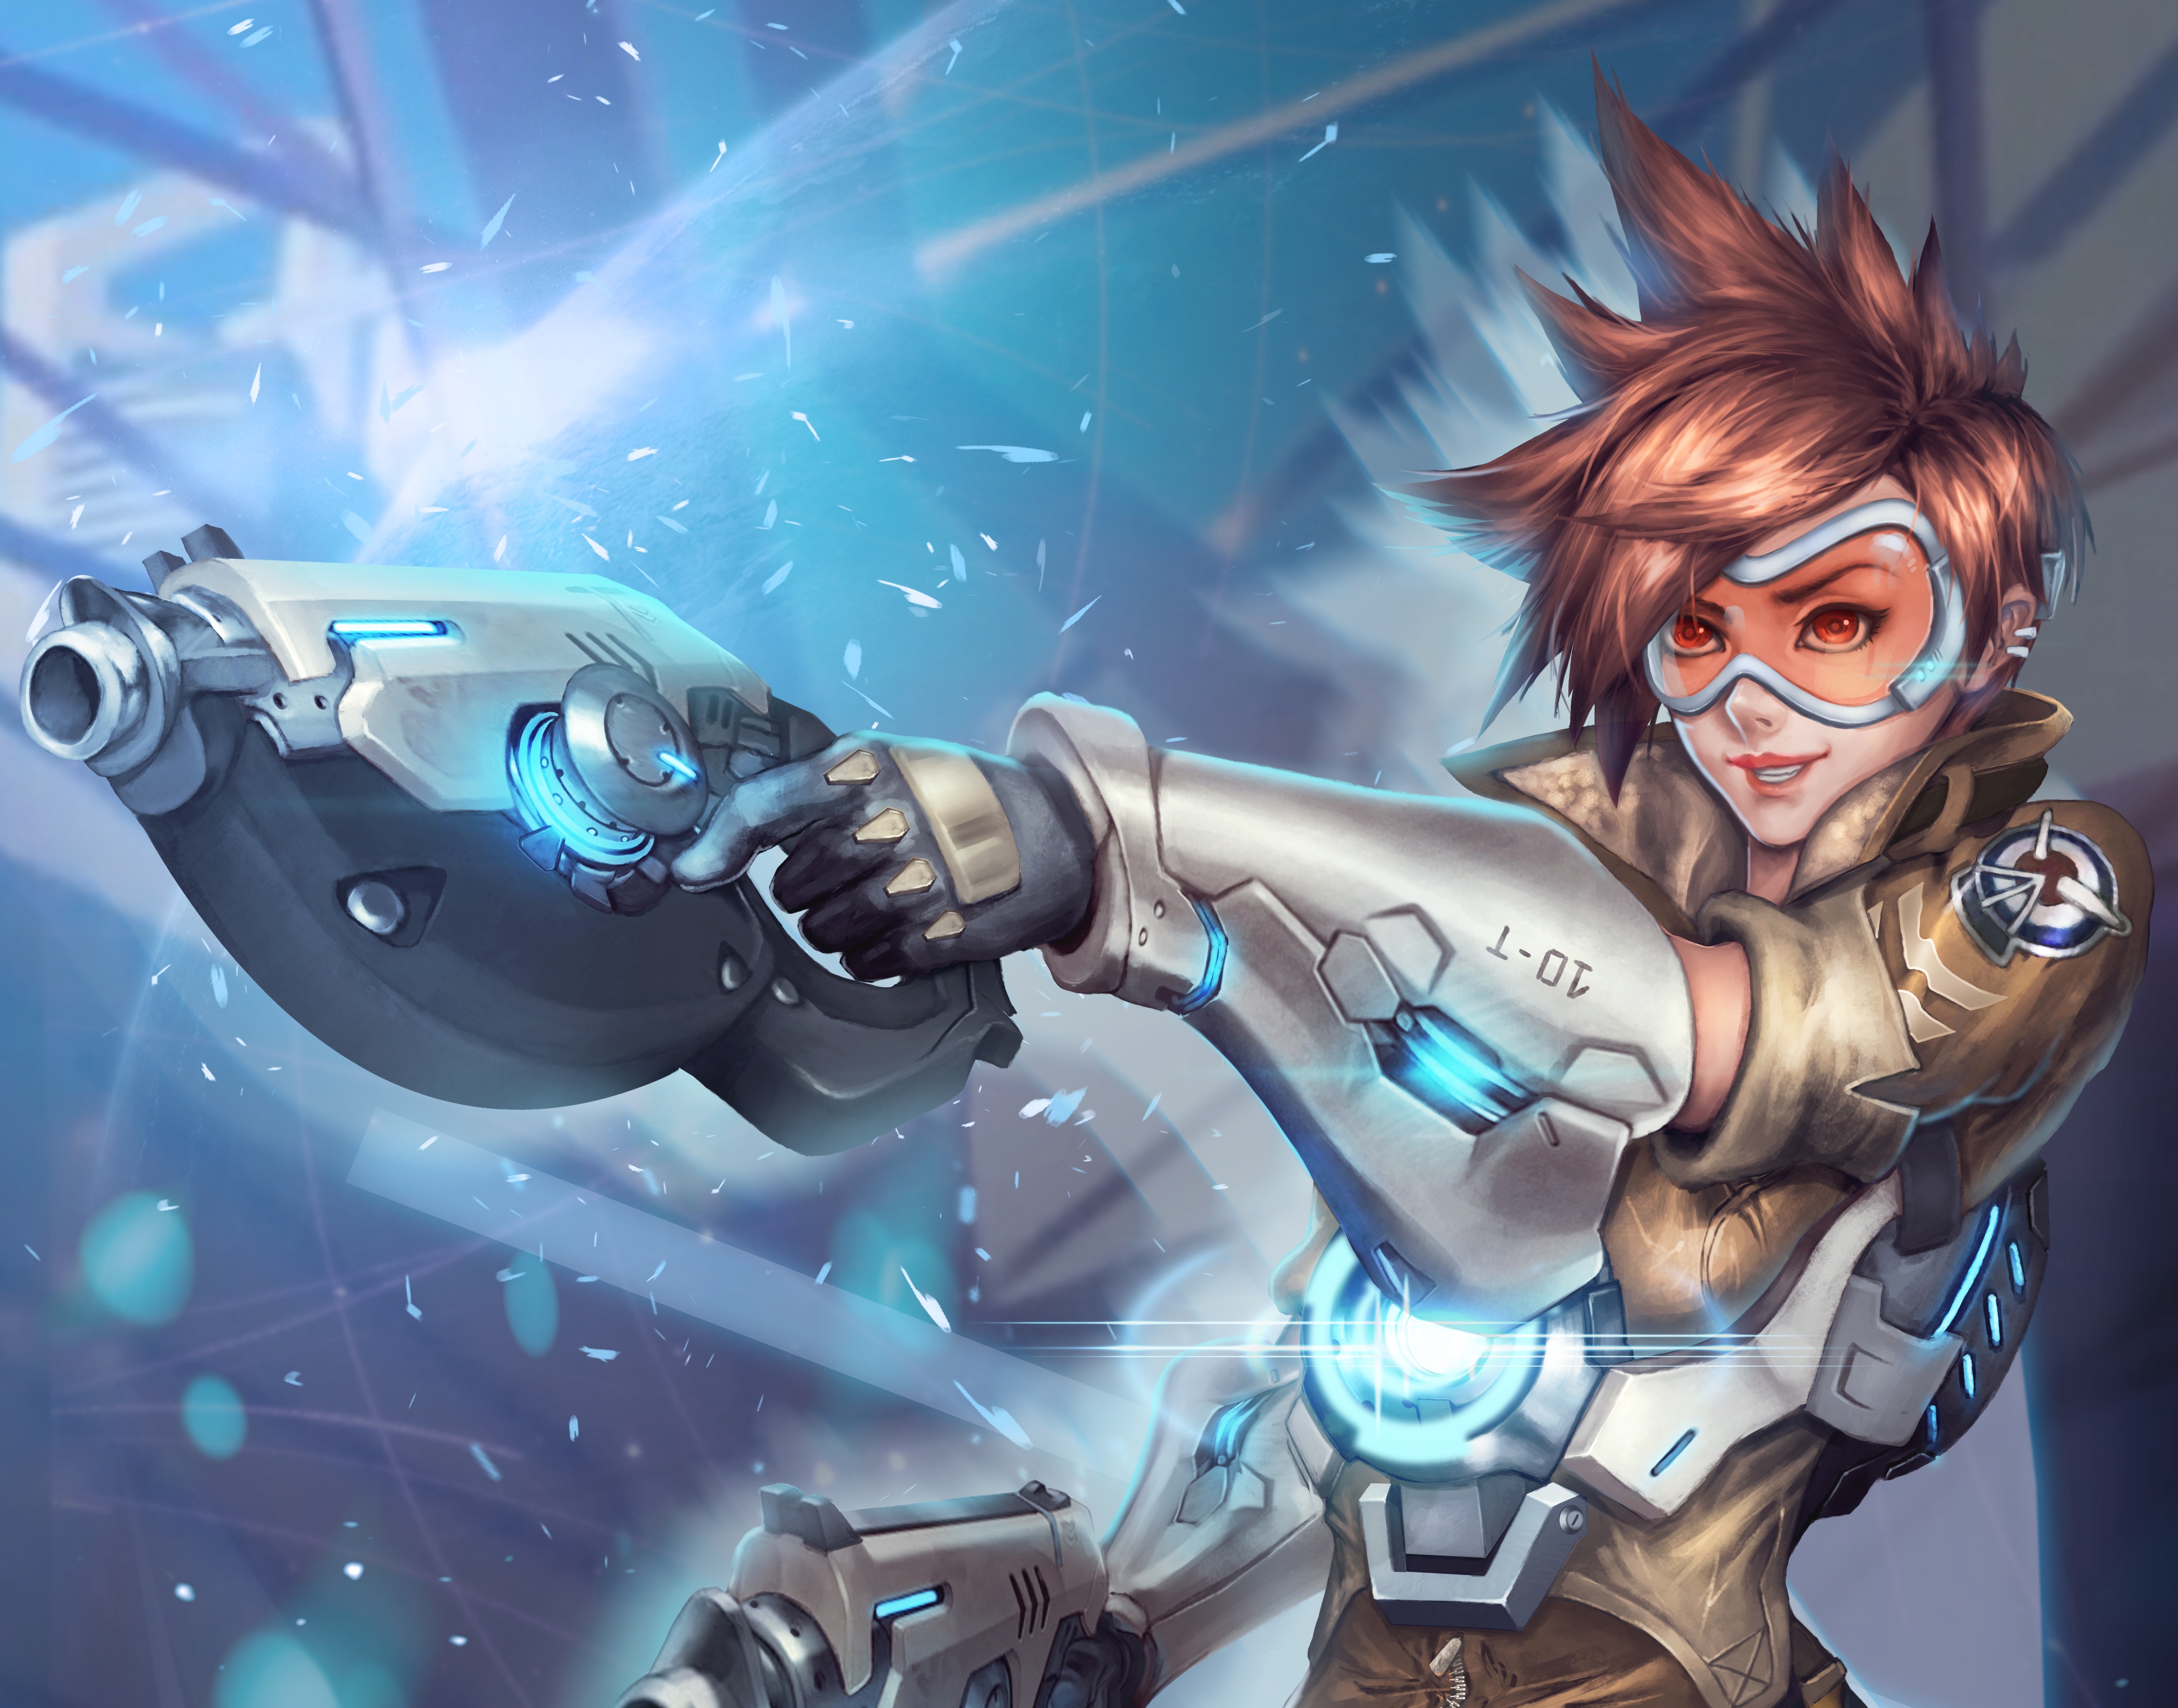 tracer overwatch wallpaper,cg artwork,action adventure game,cartoon,fictional character,illustration